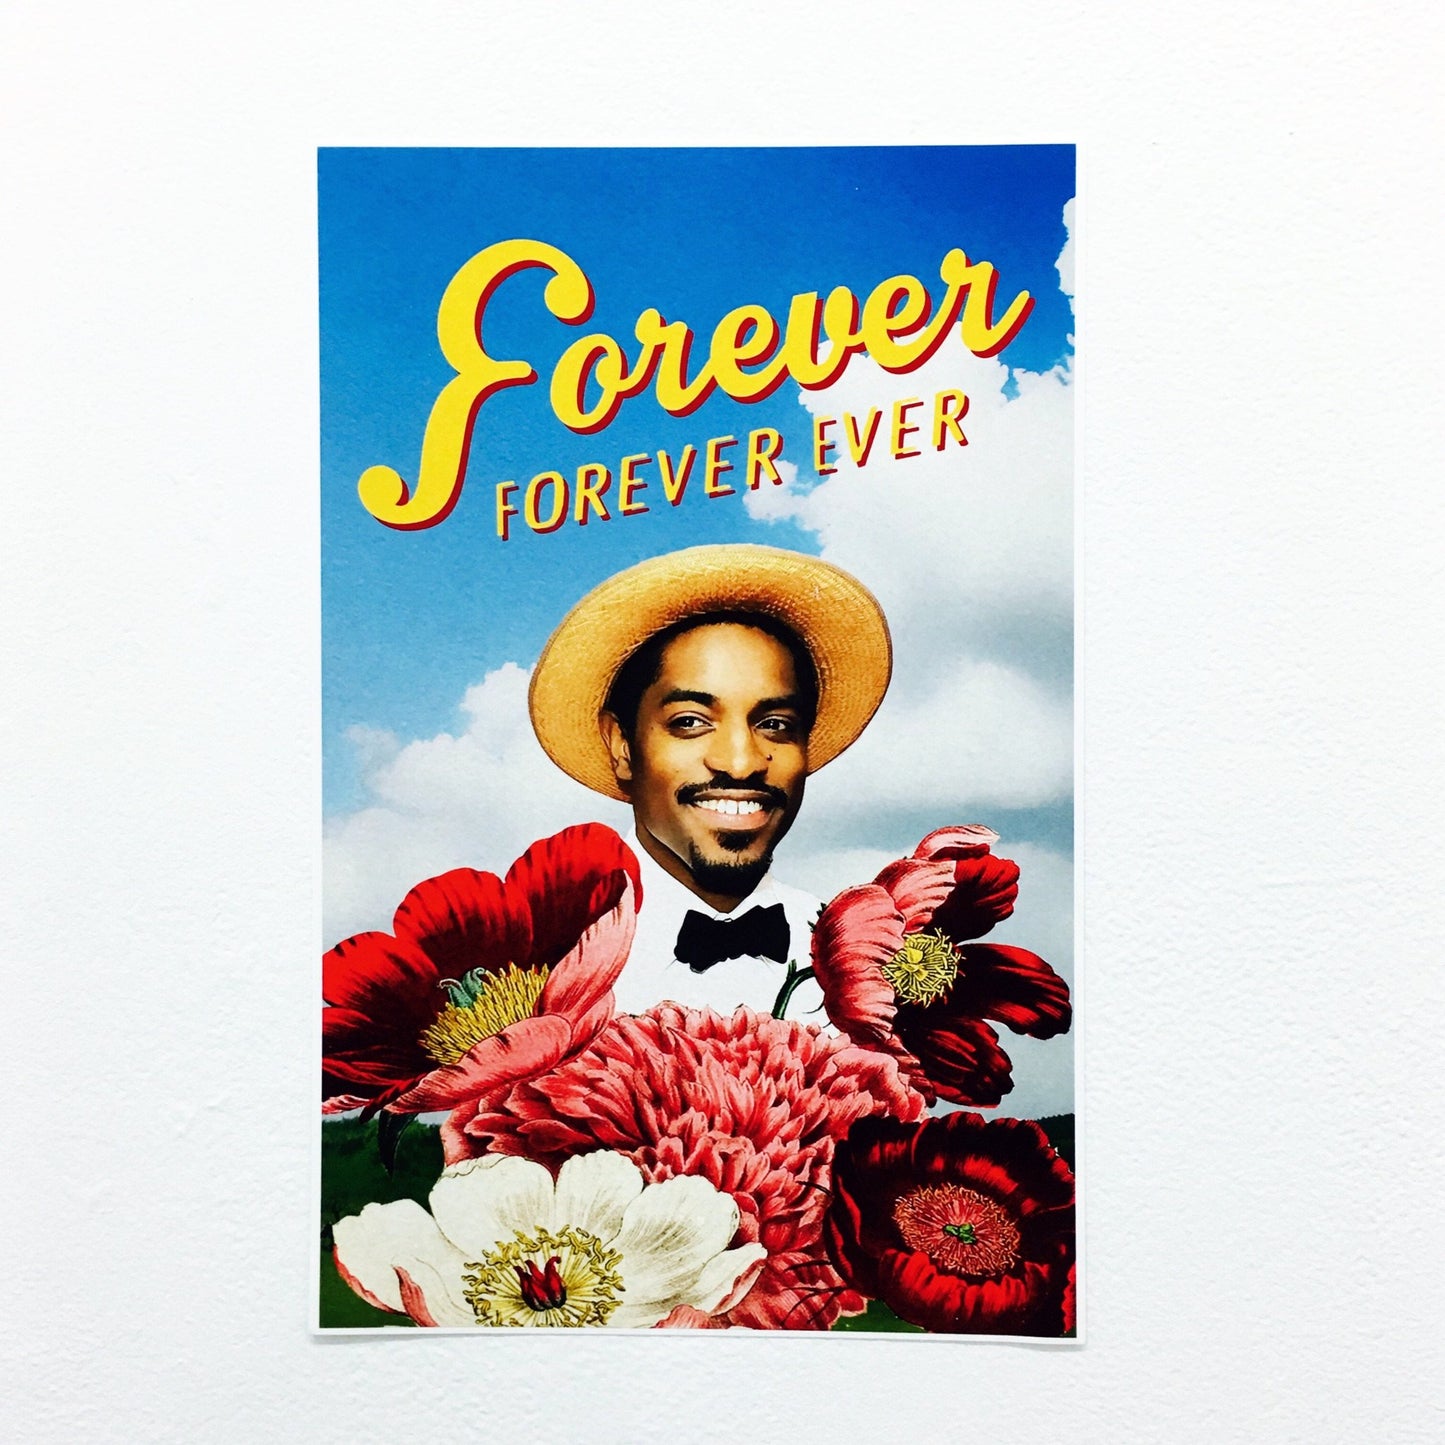 "Forever, Forever Ever" Poster by Classic City Postal Service - by Erin Lovett - K. A. Artist Shop